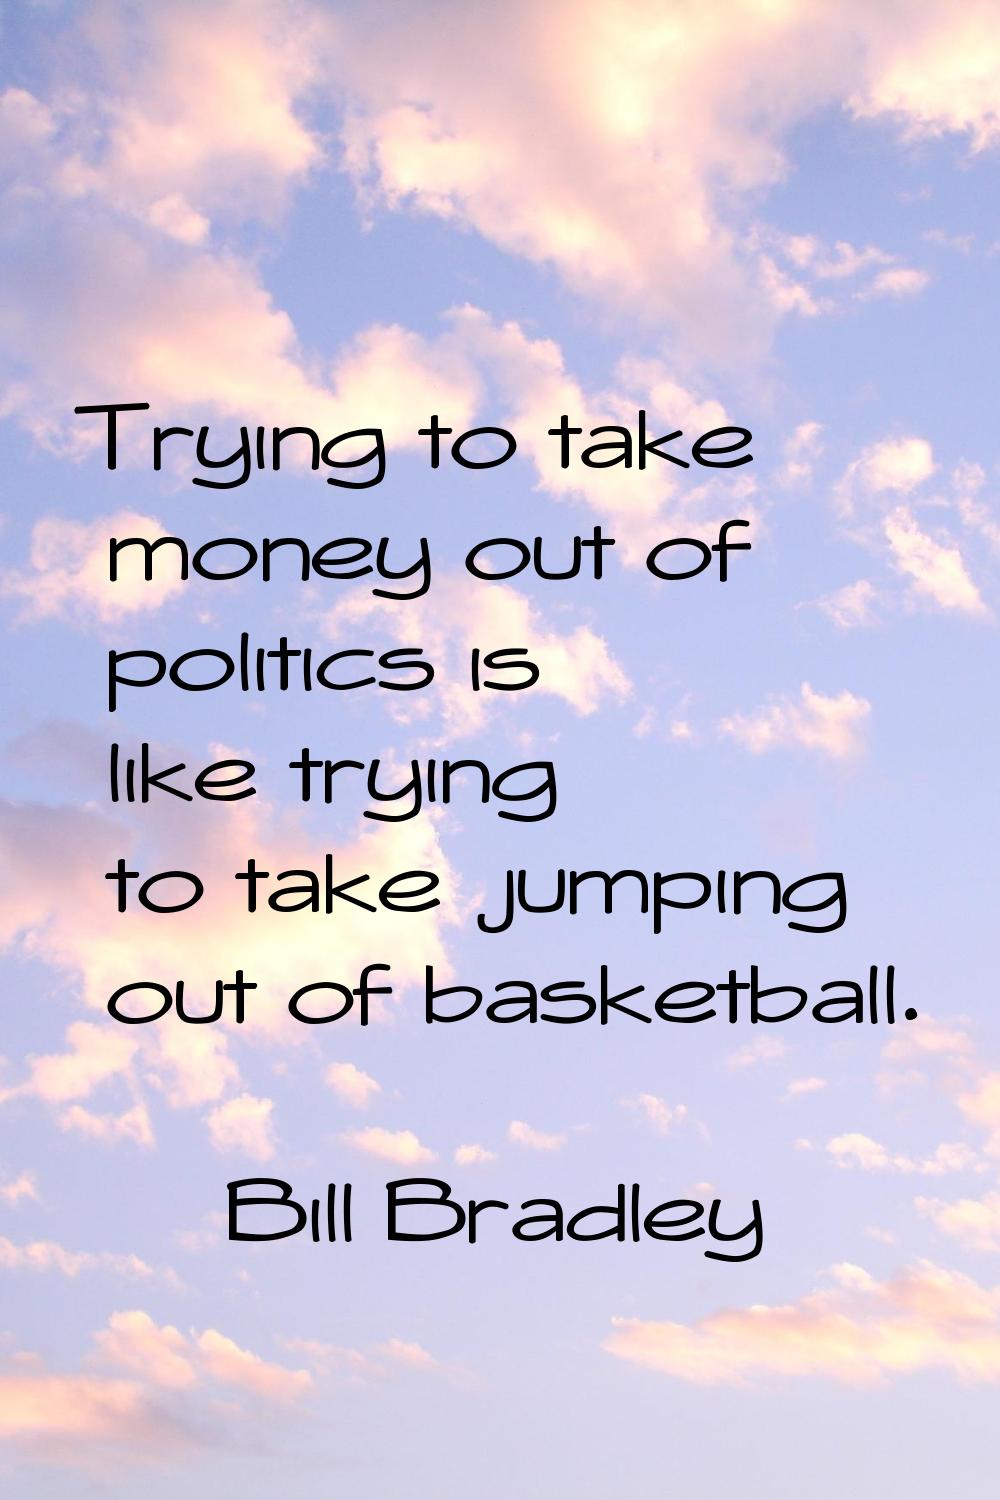 Trying to take money out of politics is like trying to take jumping out of basketball.